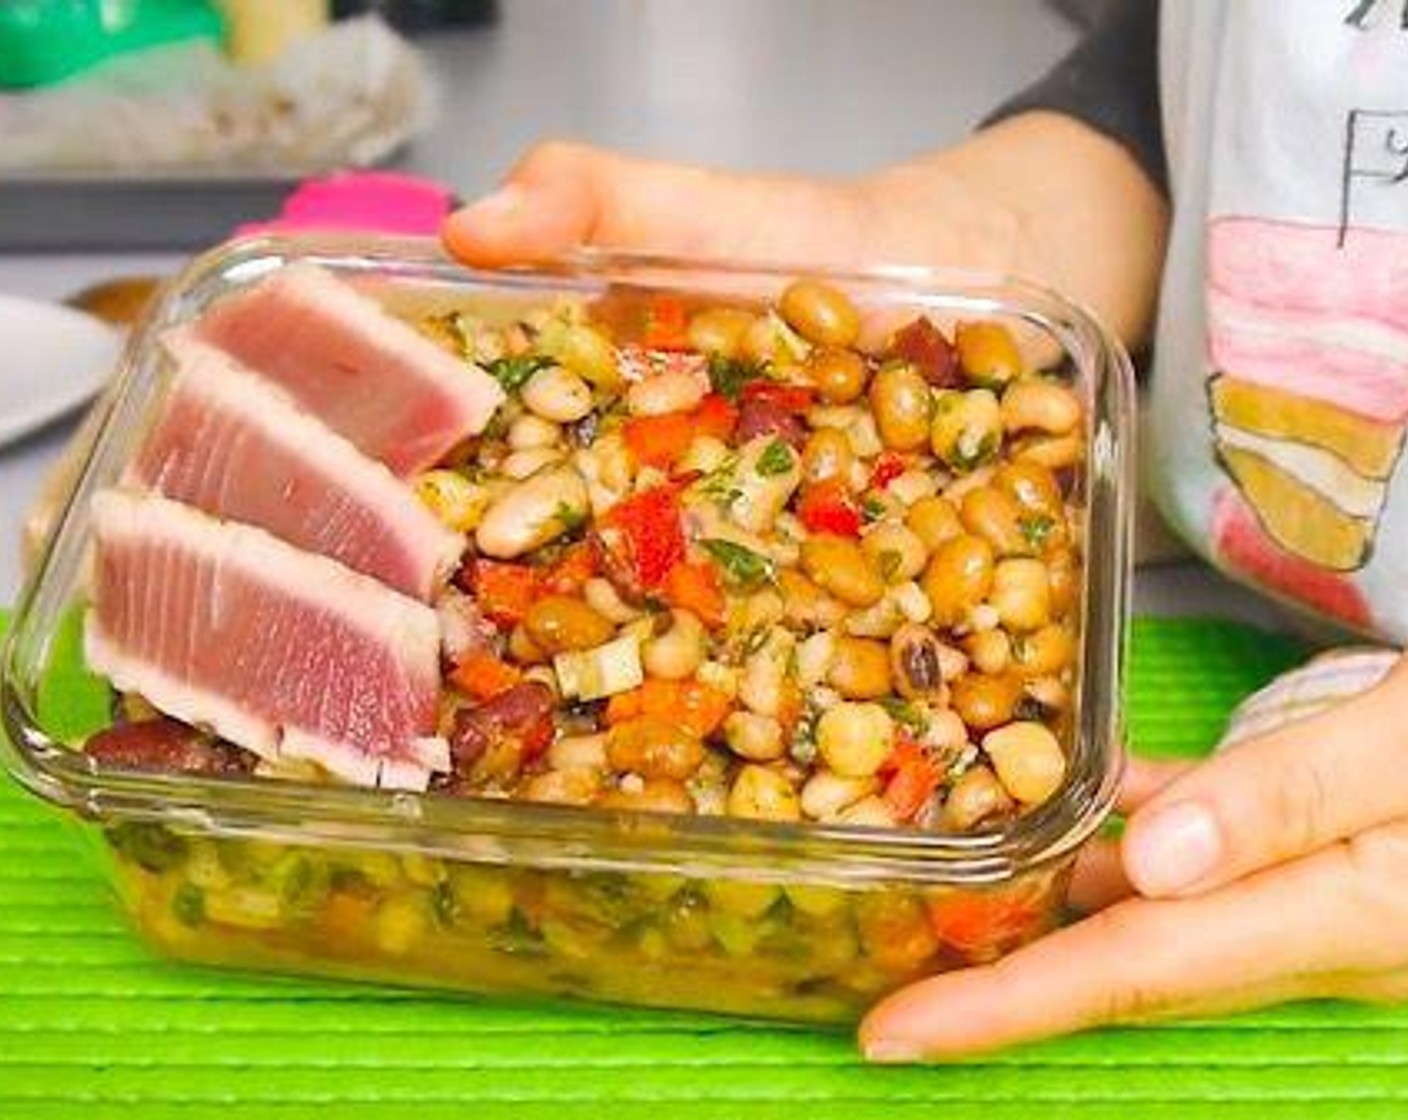 Spicy Mixed Beans and Tuna Salad